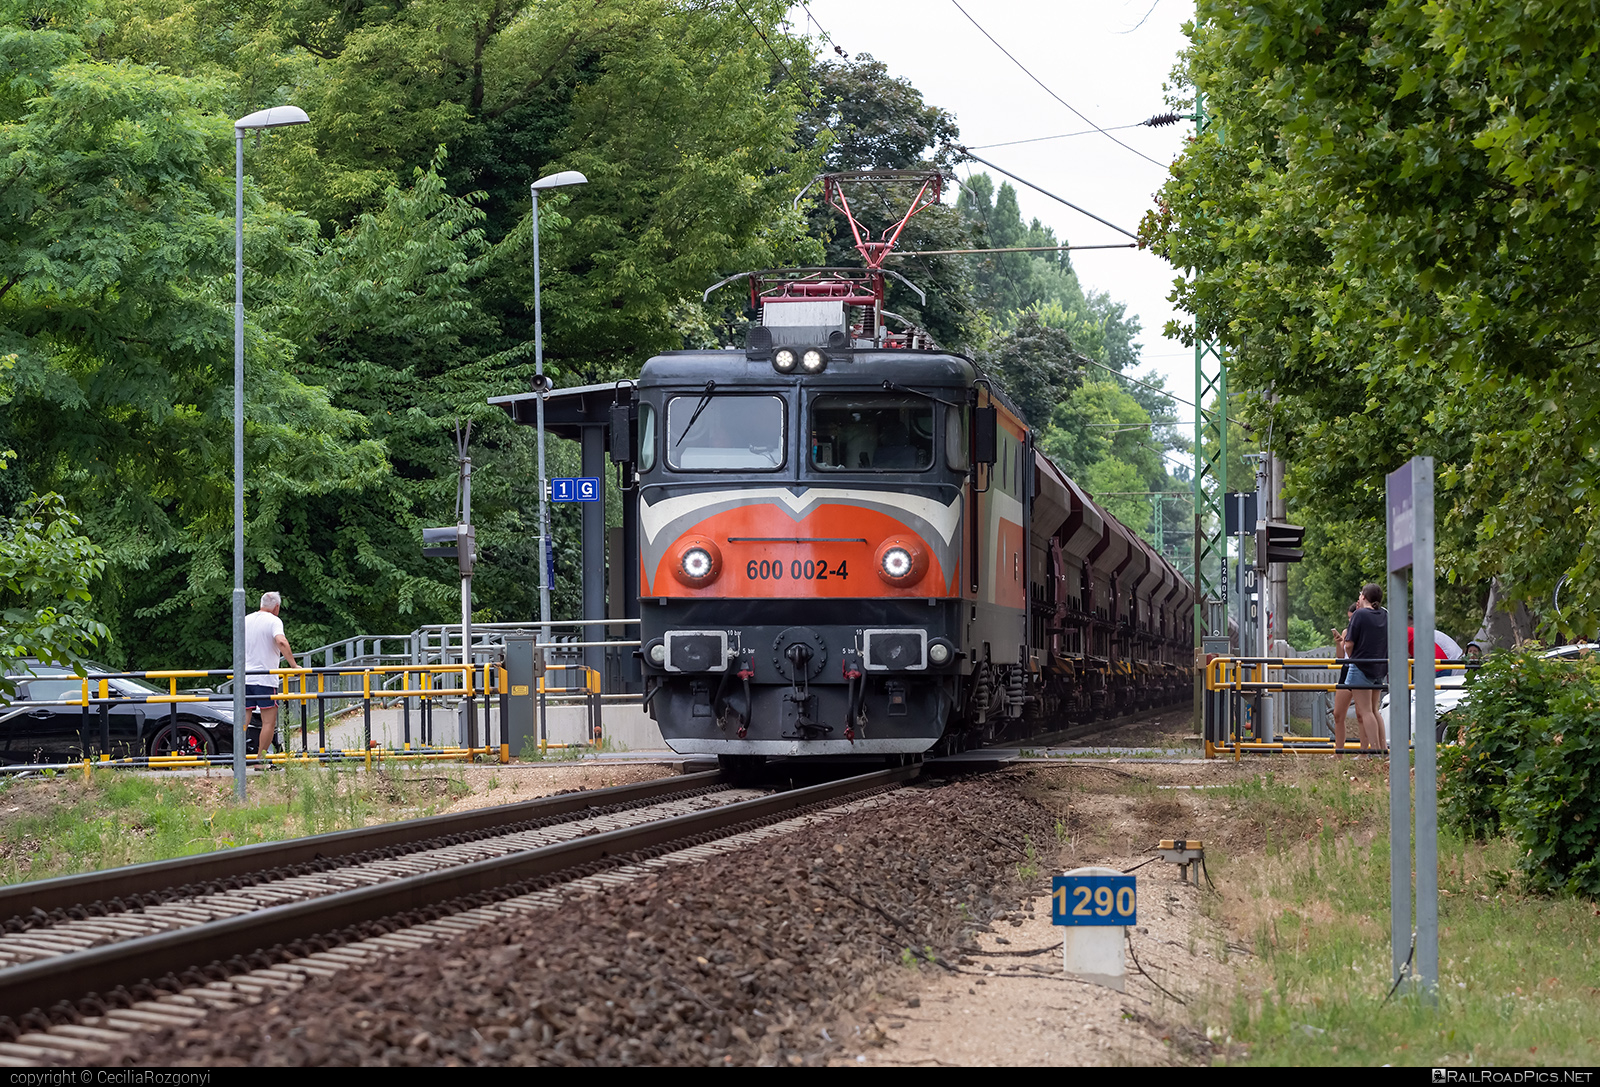 Electroputere LE 5100 - 600 002-4 operated by Magyar Magánvasút ZRt. #electroputere #electroputerecraiova #electroputerele5100 #hopperwagon #le5100